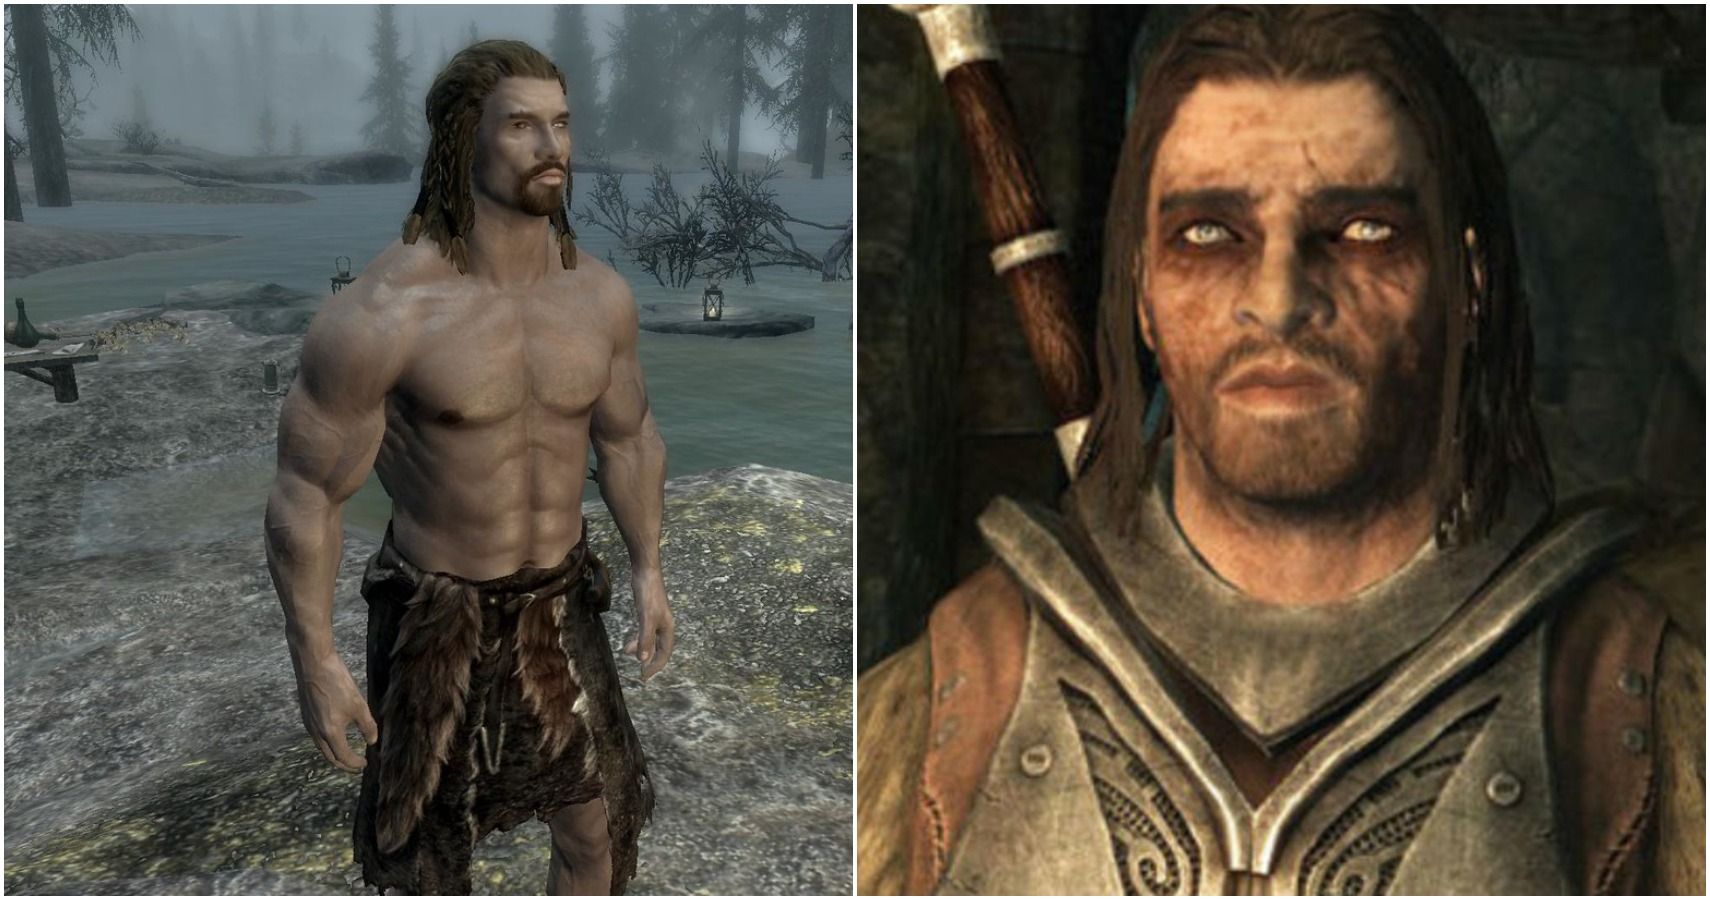 With pictures skyrim partners in marriage Marriage (Skyrim)